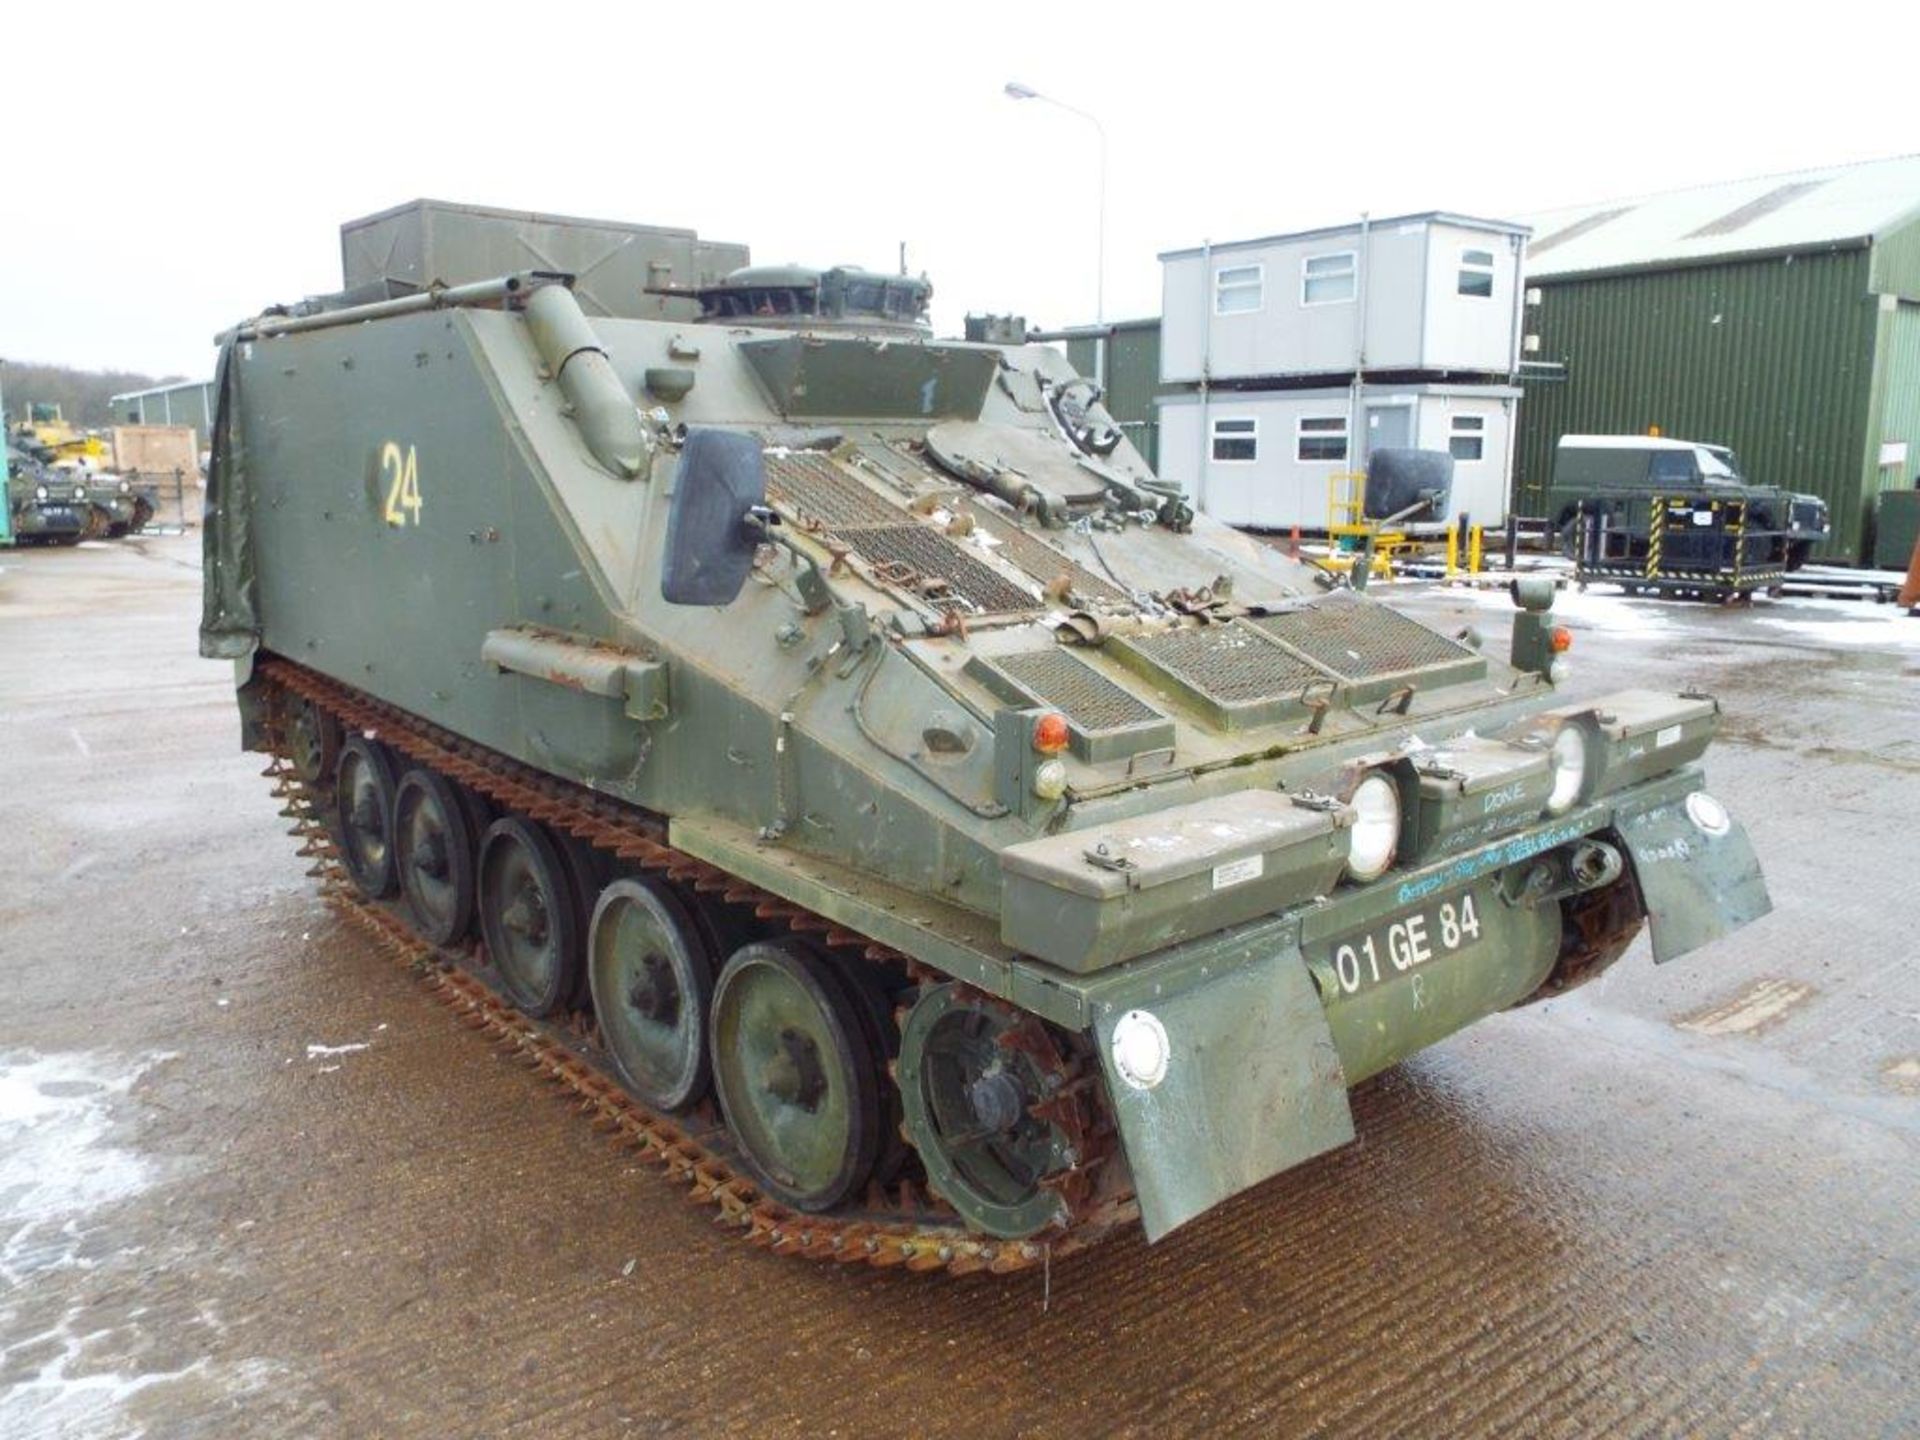 Dieselised CVRT FV105 Sultan Armoured Personnel Carrier with David Brown TN15e Gearbox